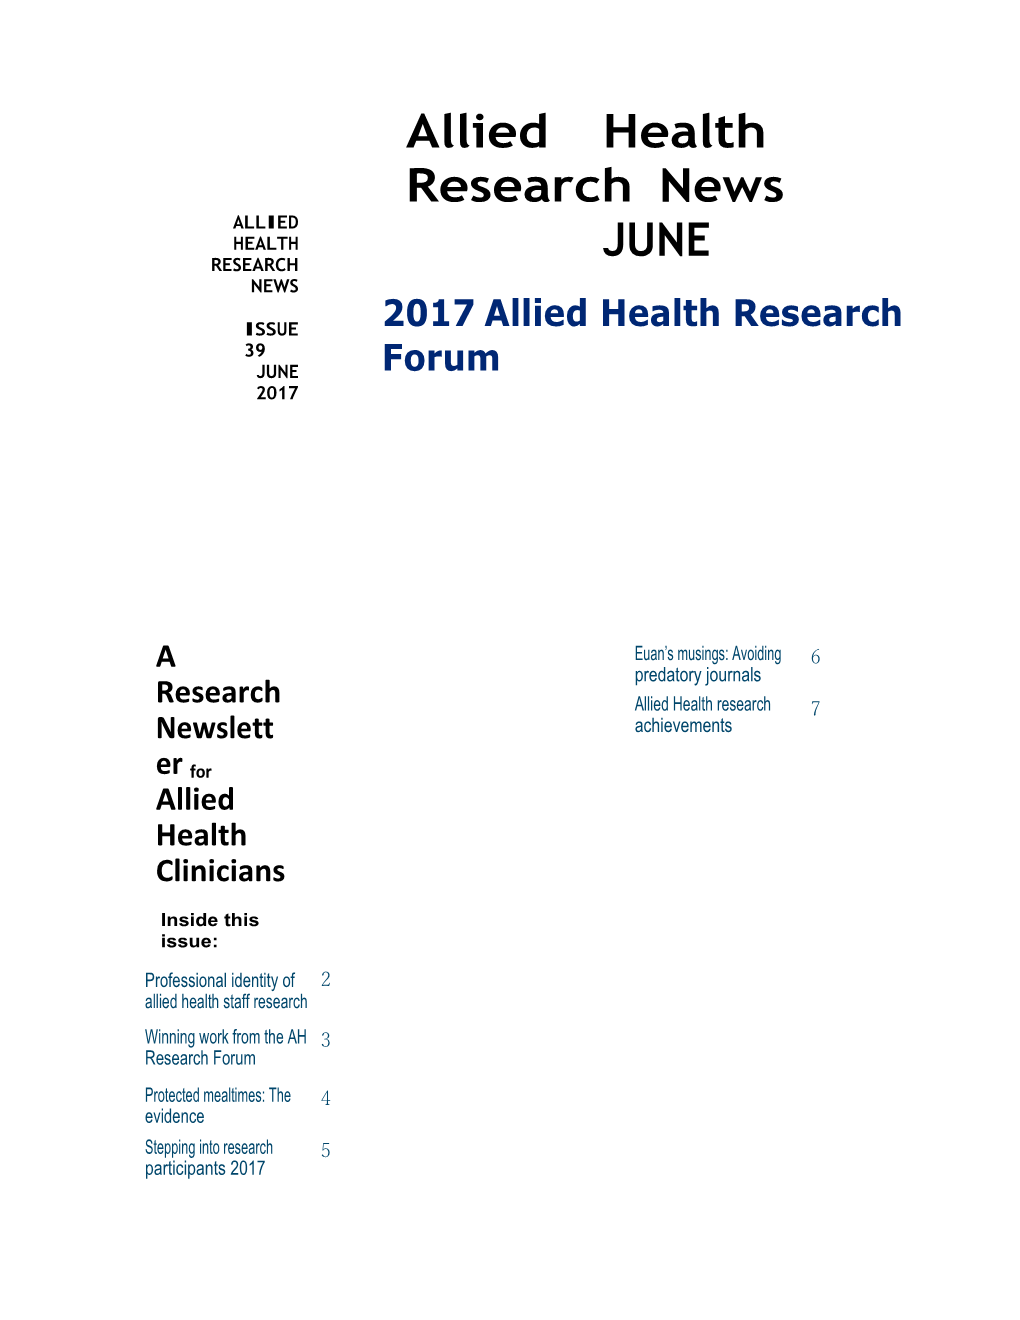 Allied Health Research News